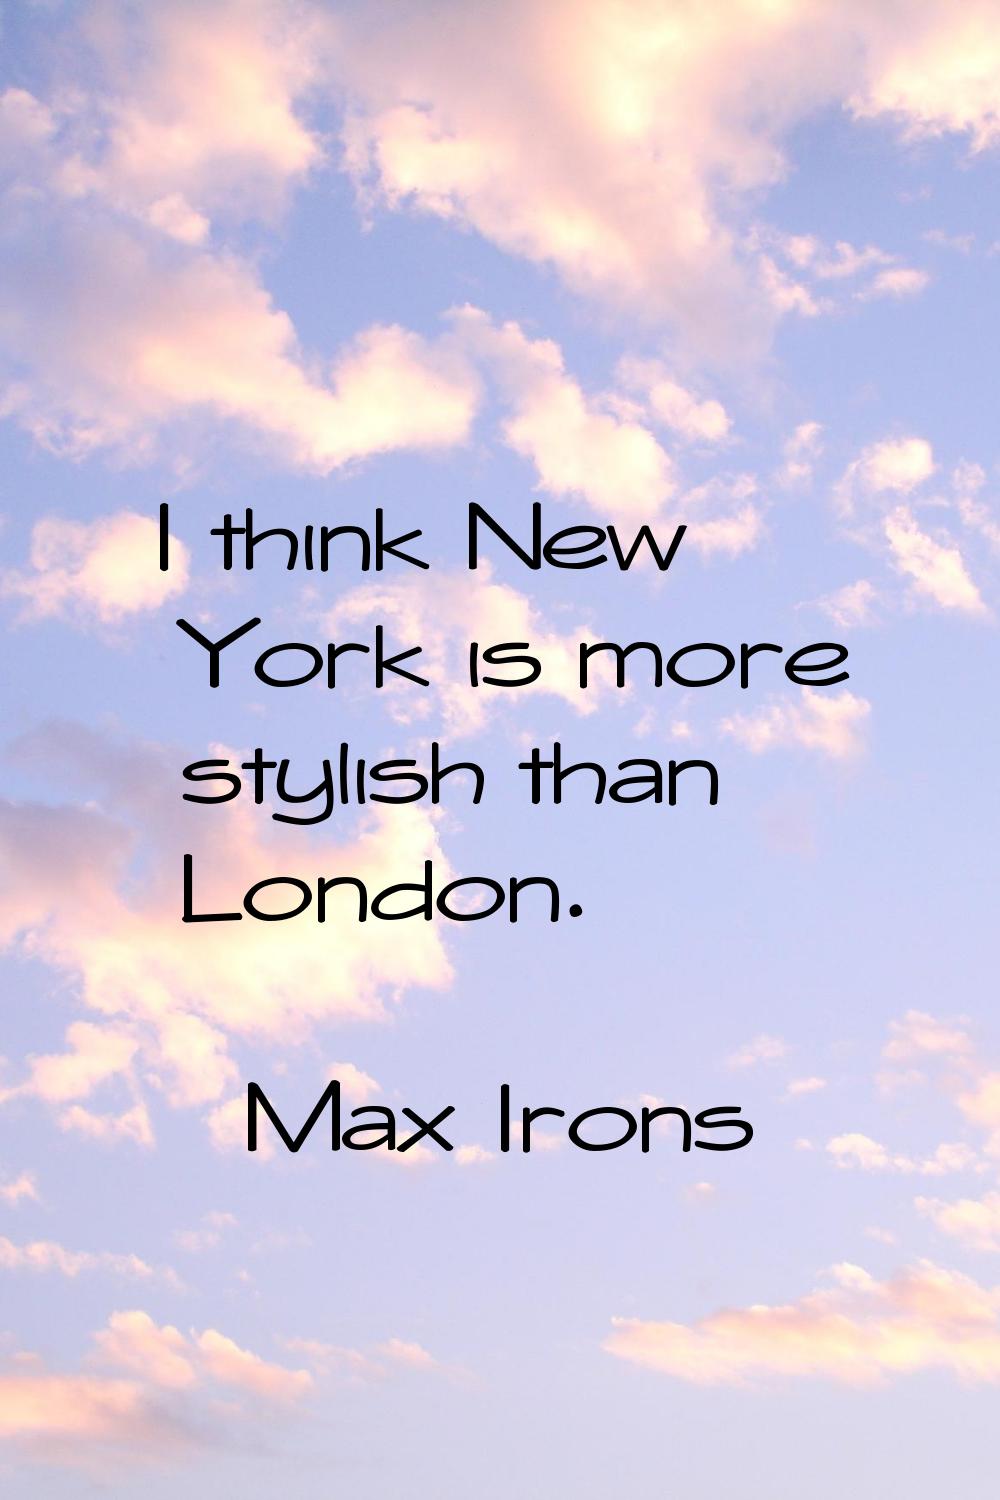 I think New York is more stylish than London.